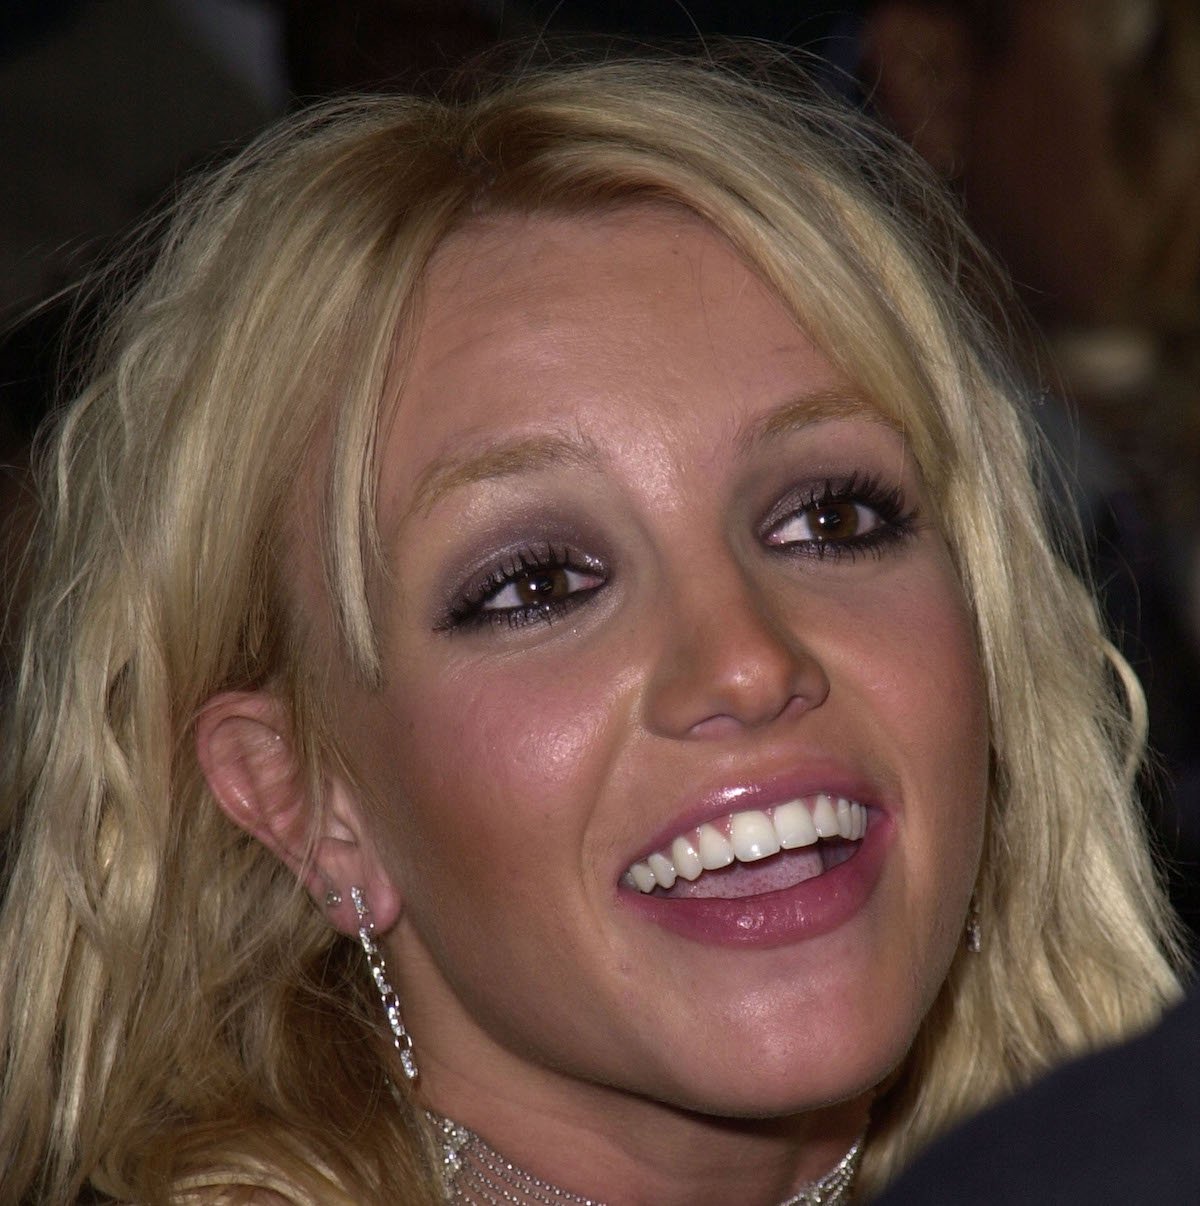 Britney Spears in a smiling headshot.